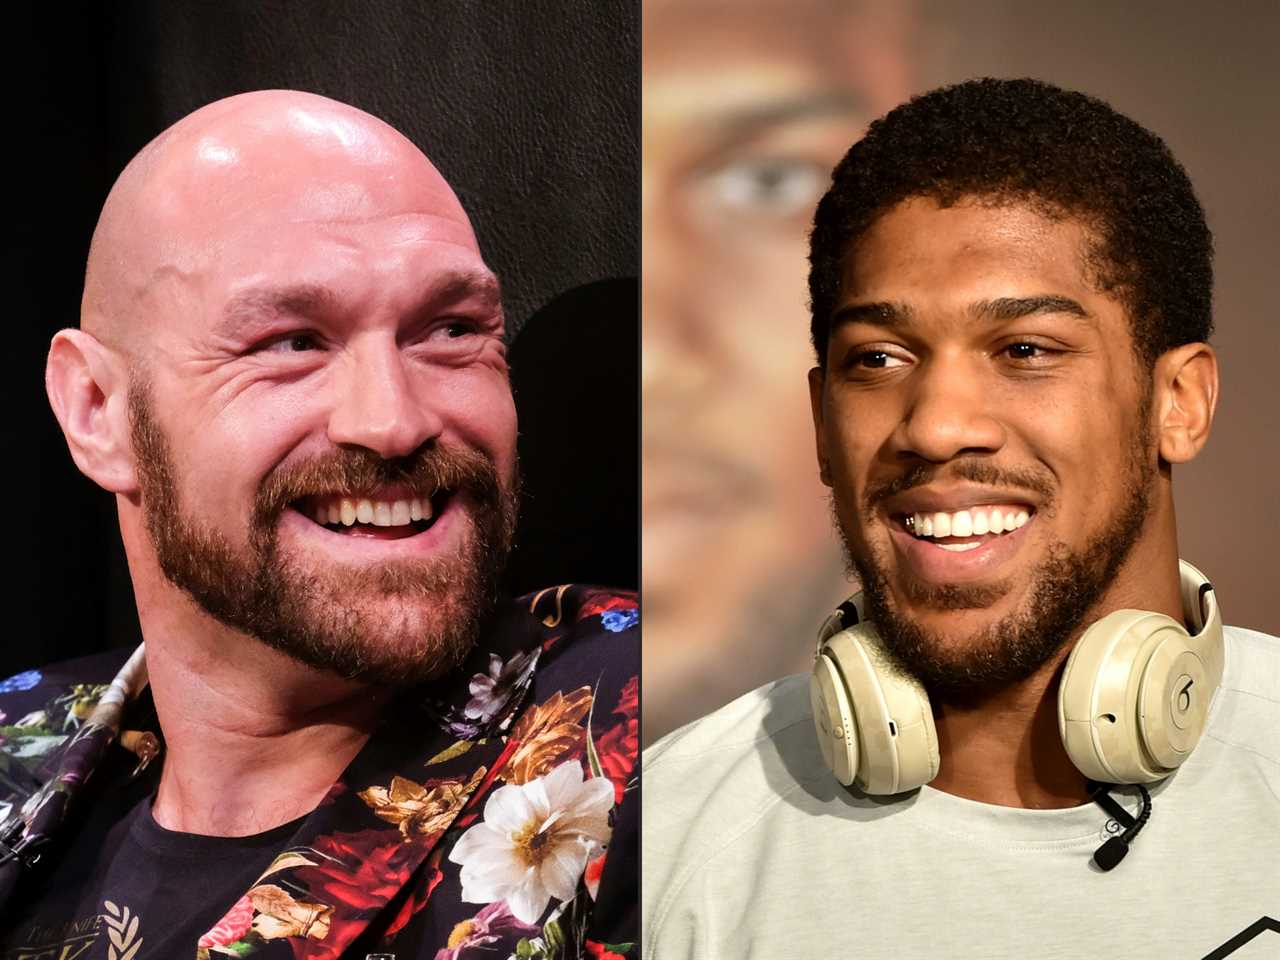 ‘Boxing is dying’ – Jake Paul claims Tyson Fury is ‘afraid’ to fight Anthony Joshua and Oleksandr Usyk